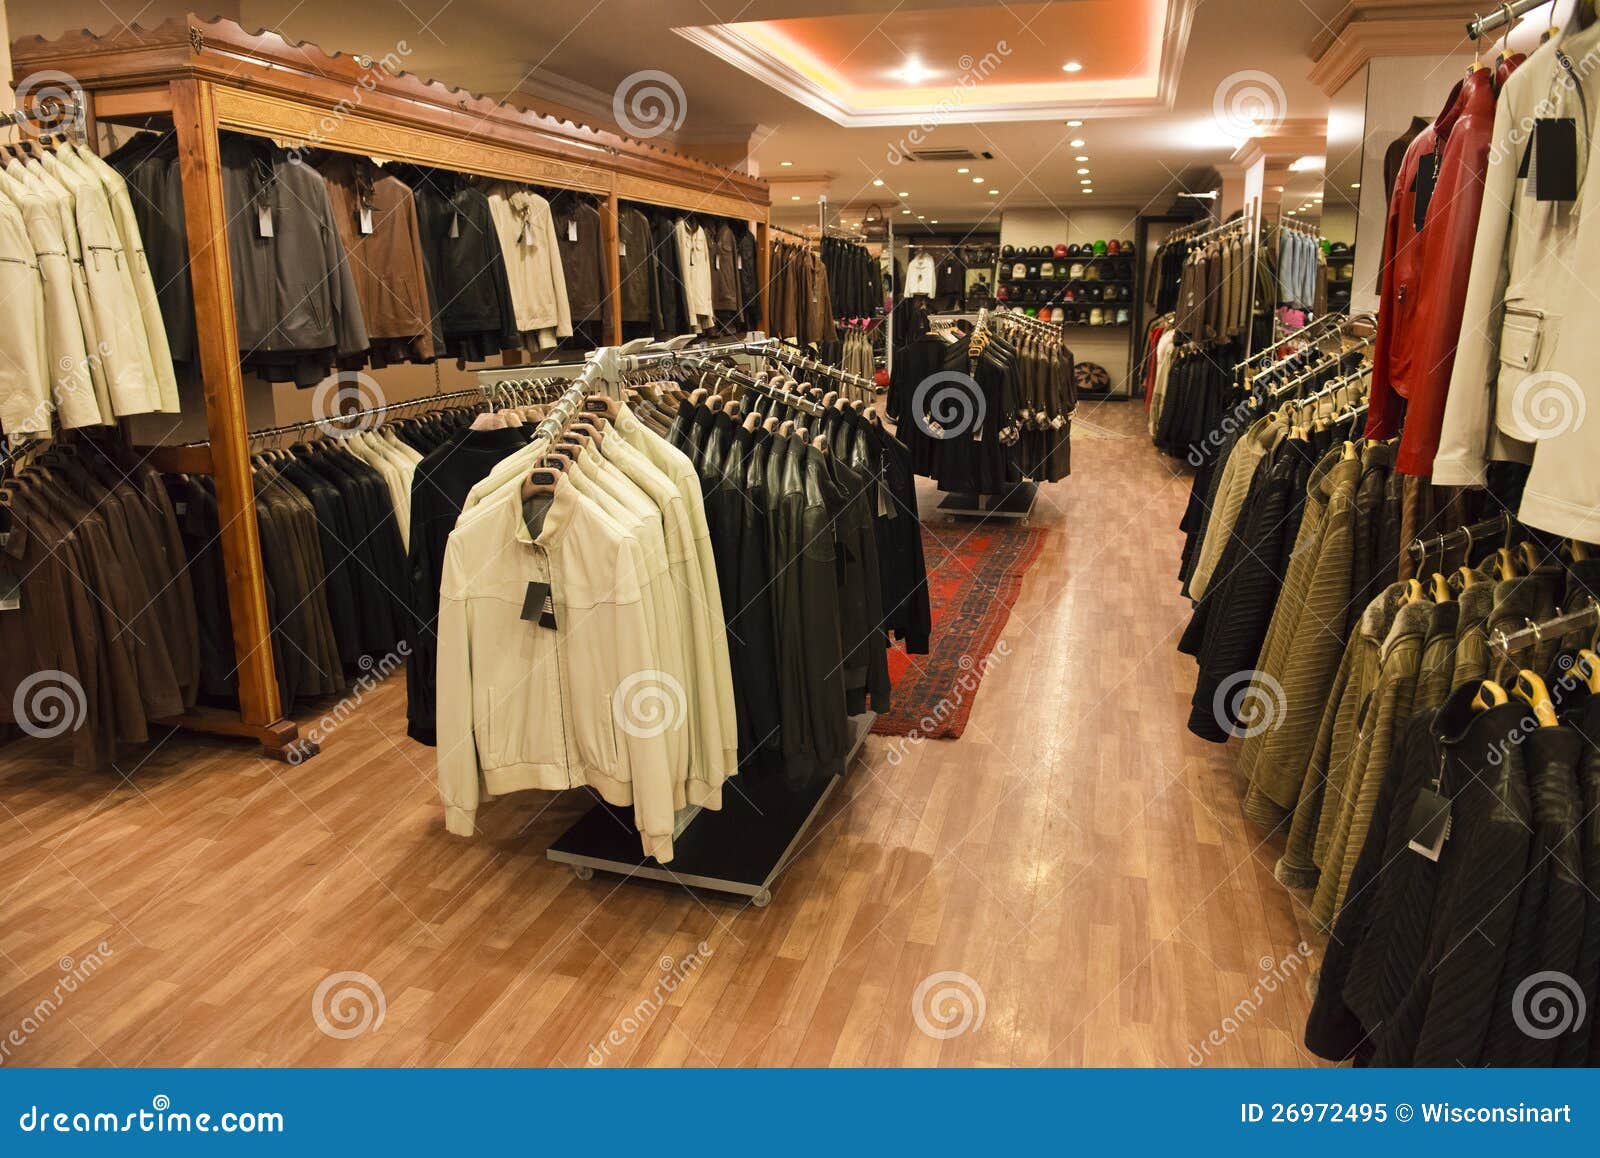 Leather Coats In A Retail Store Shop Royalty Free Stock Photo - Image: 26972495